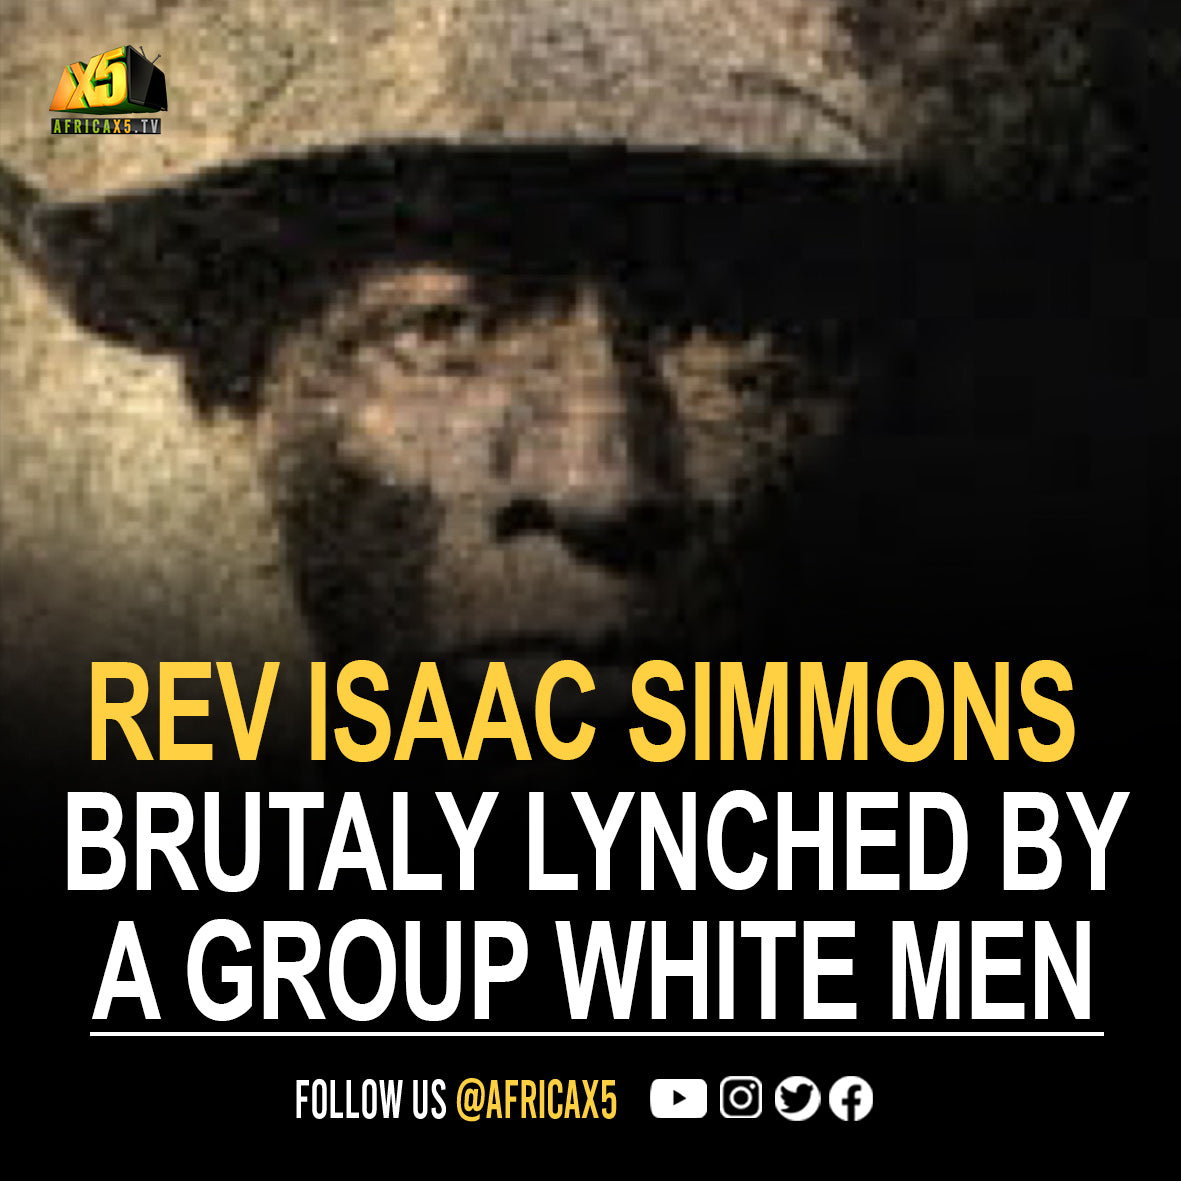 In 1944, a group of white men brutally lynched Rev. Isaac Simmons, a Black minister & farmer